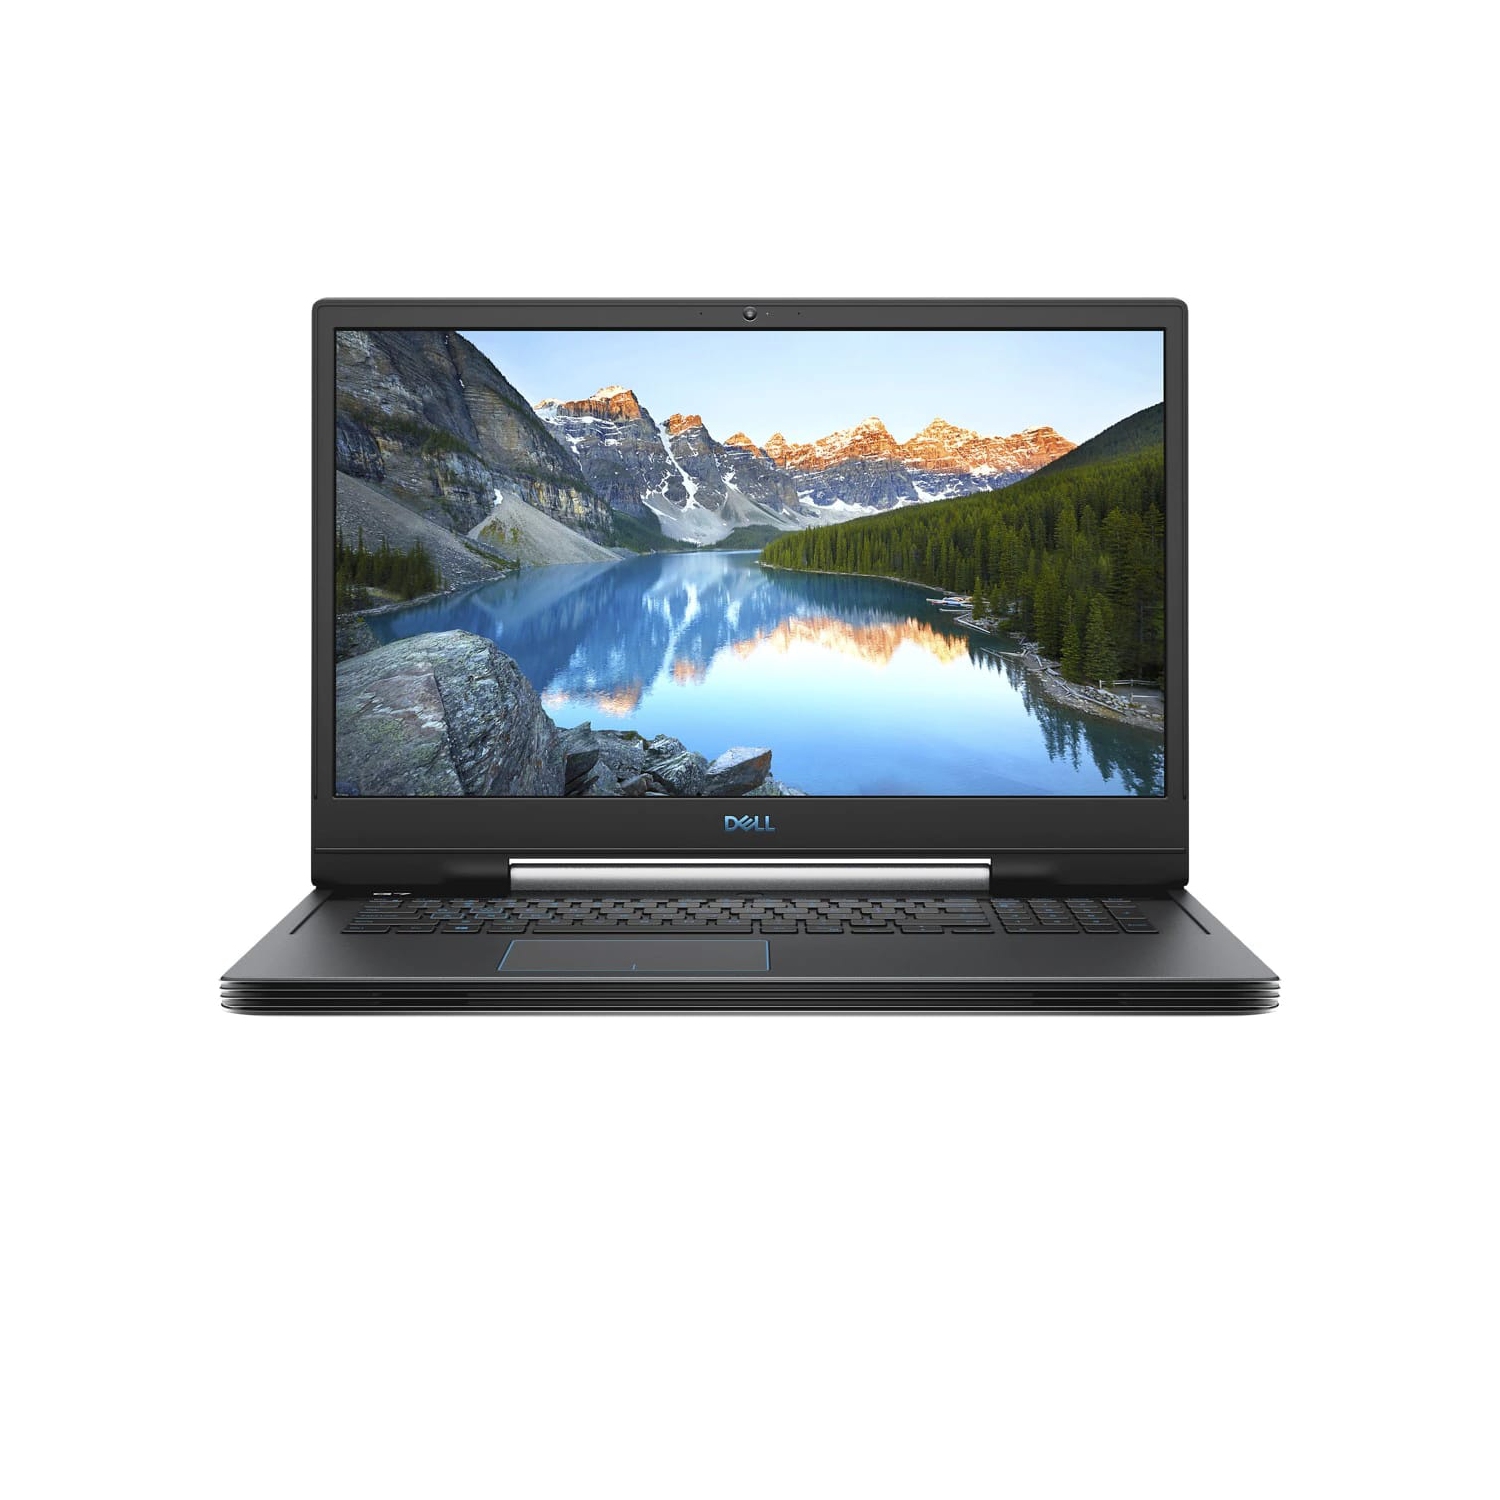 Refurbished (Excellent) – Dell G7 7790 Gaming Laptop (2019) | 17.3" FHD | Core i5 - 512GB SSD + 1TB HDD - 16GB RAM - RTX 2060 | 4 Cores @ 4.1 GHz - 6GB GDDR6